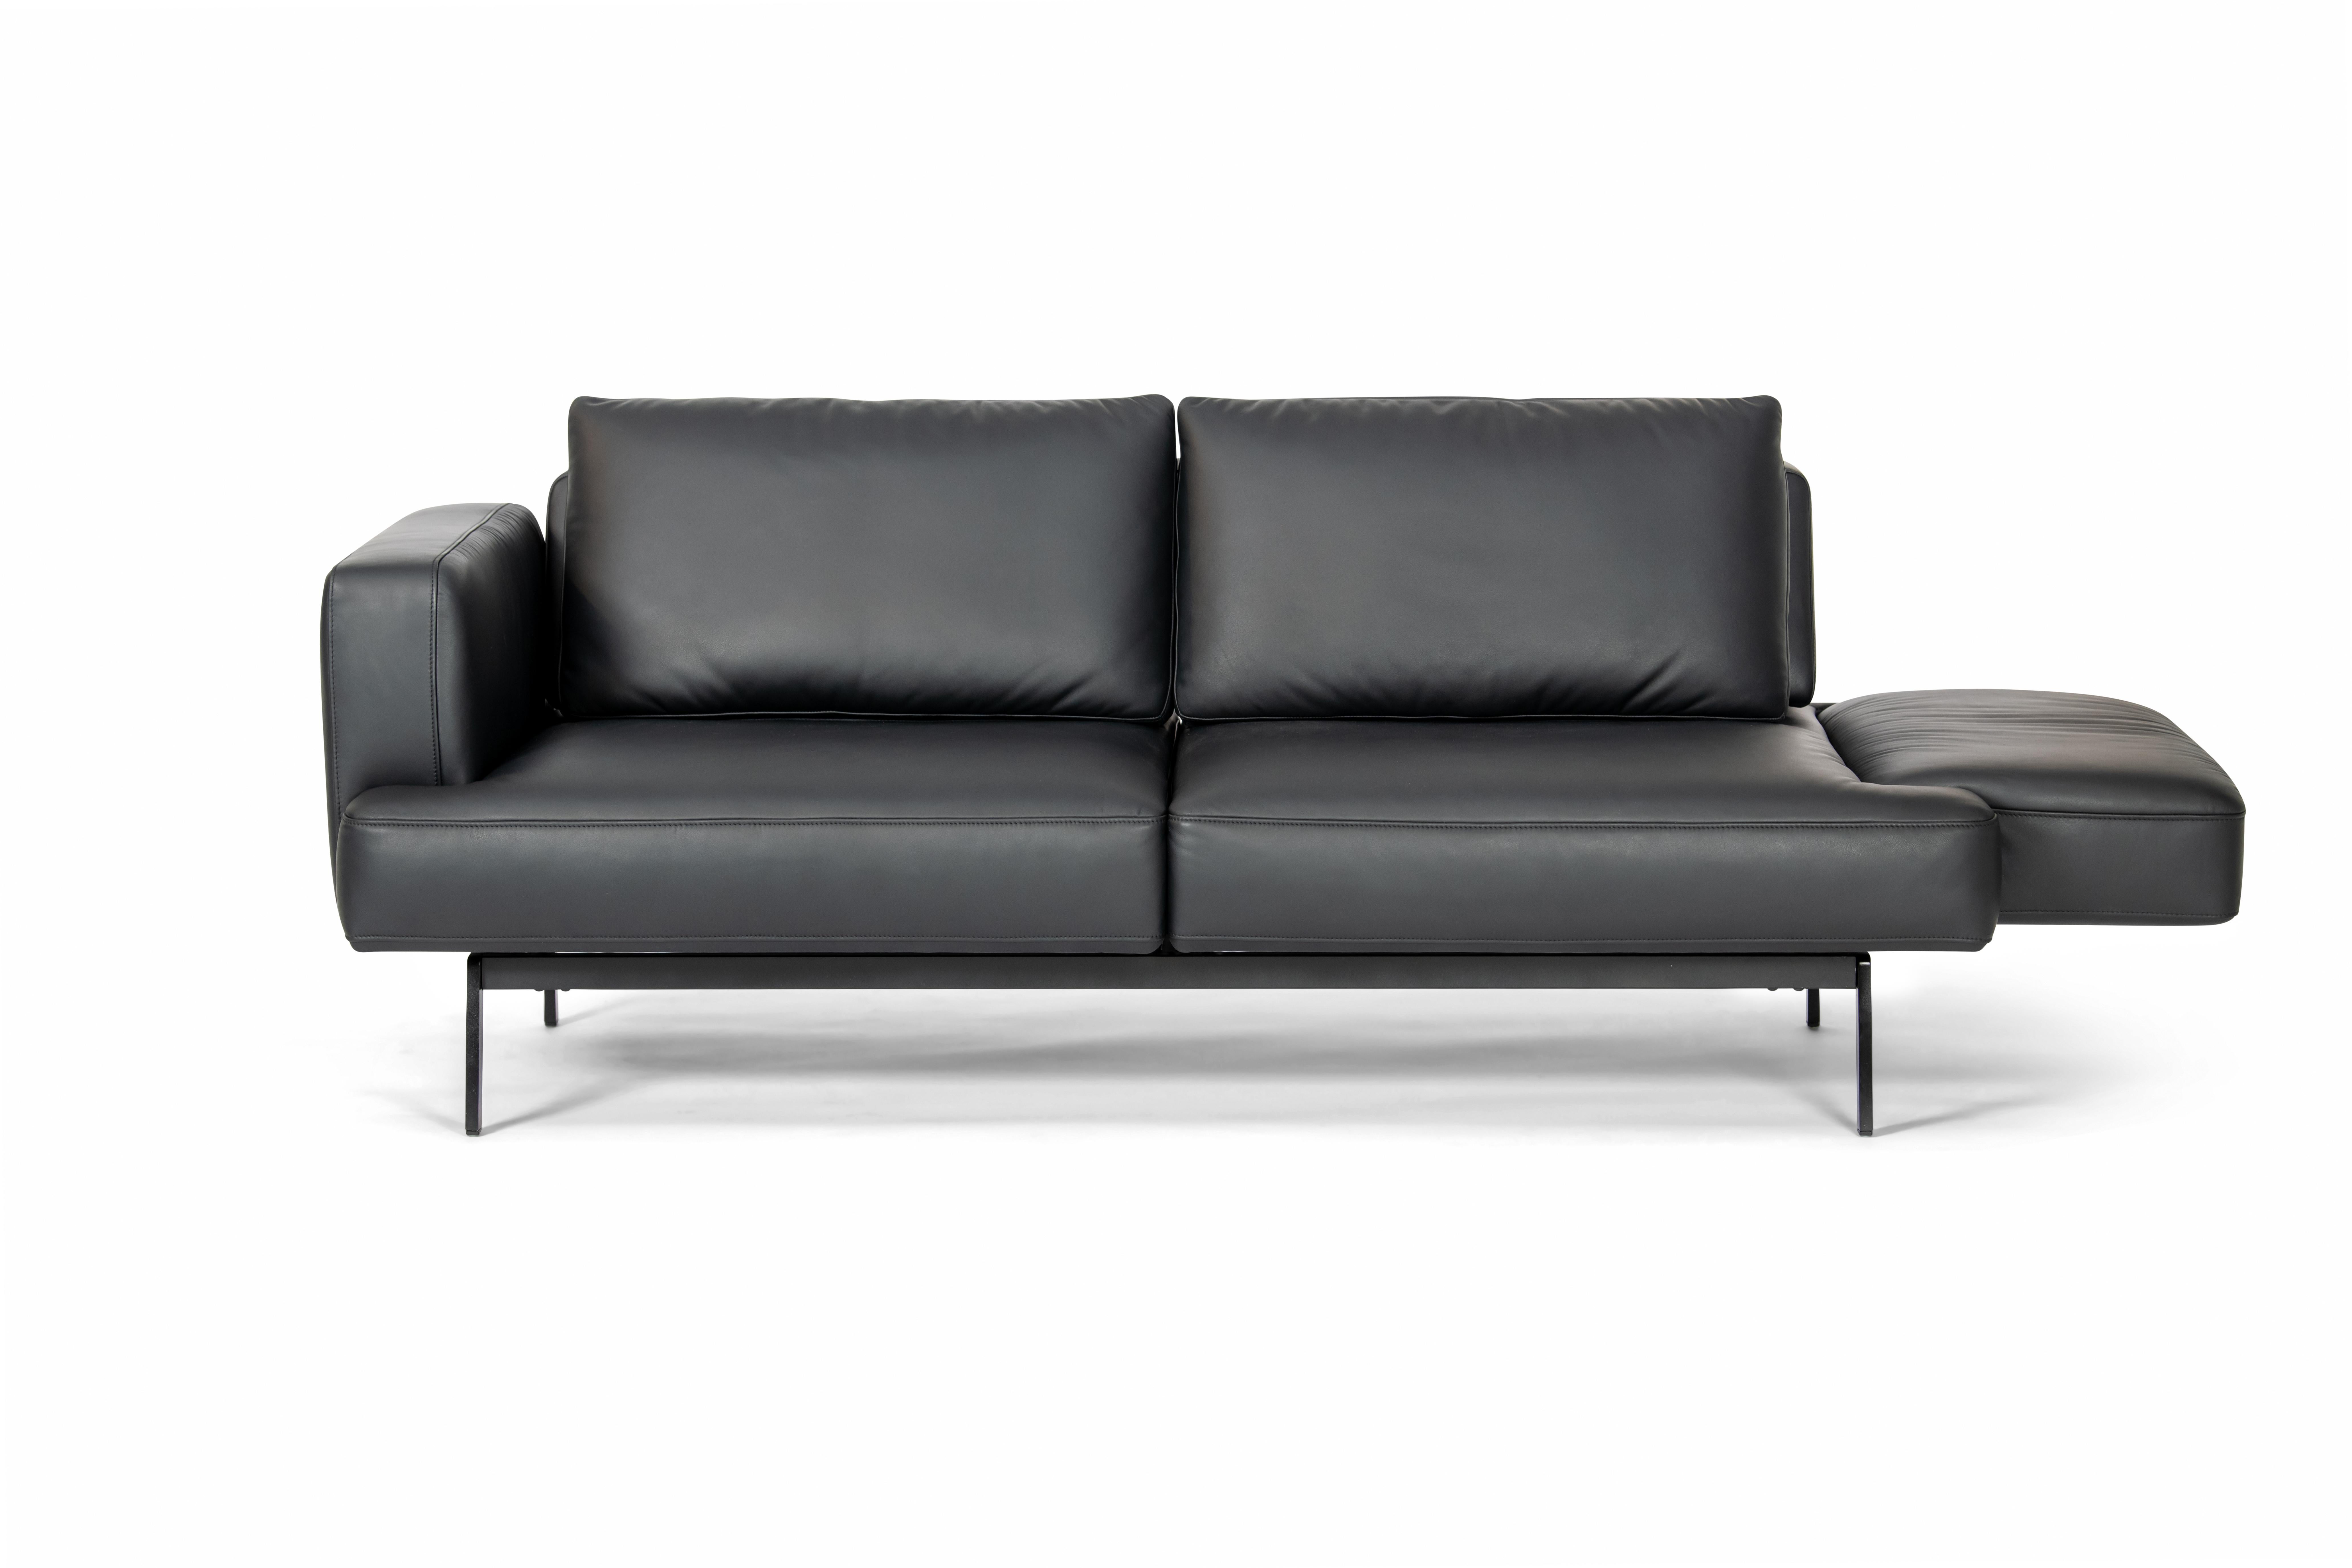 DeSede DS-747/02 Multifunctional Sofa in Black Leather Seat and Back Upholstery For Sale 4